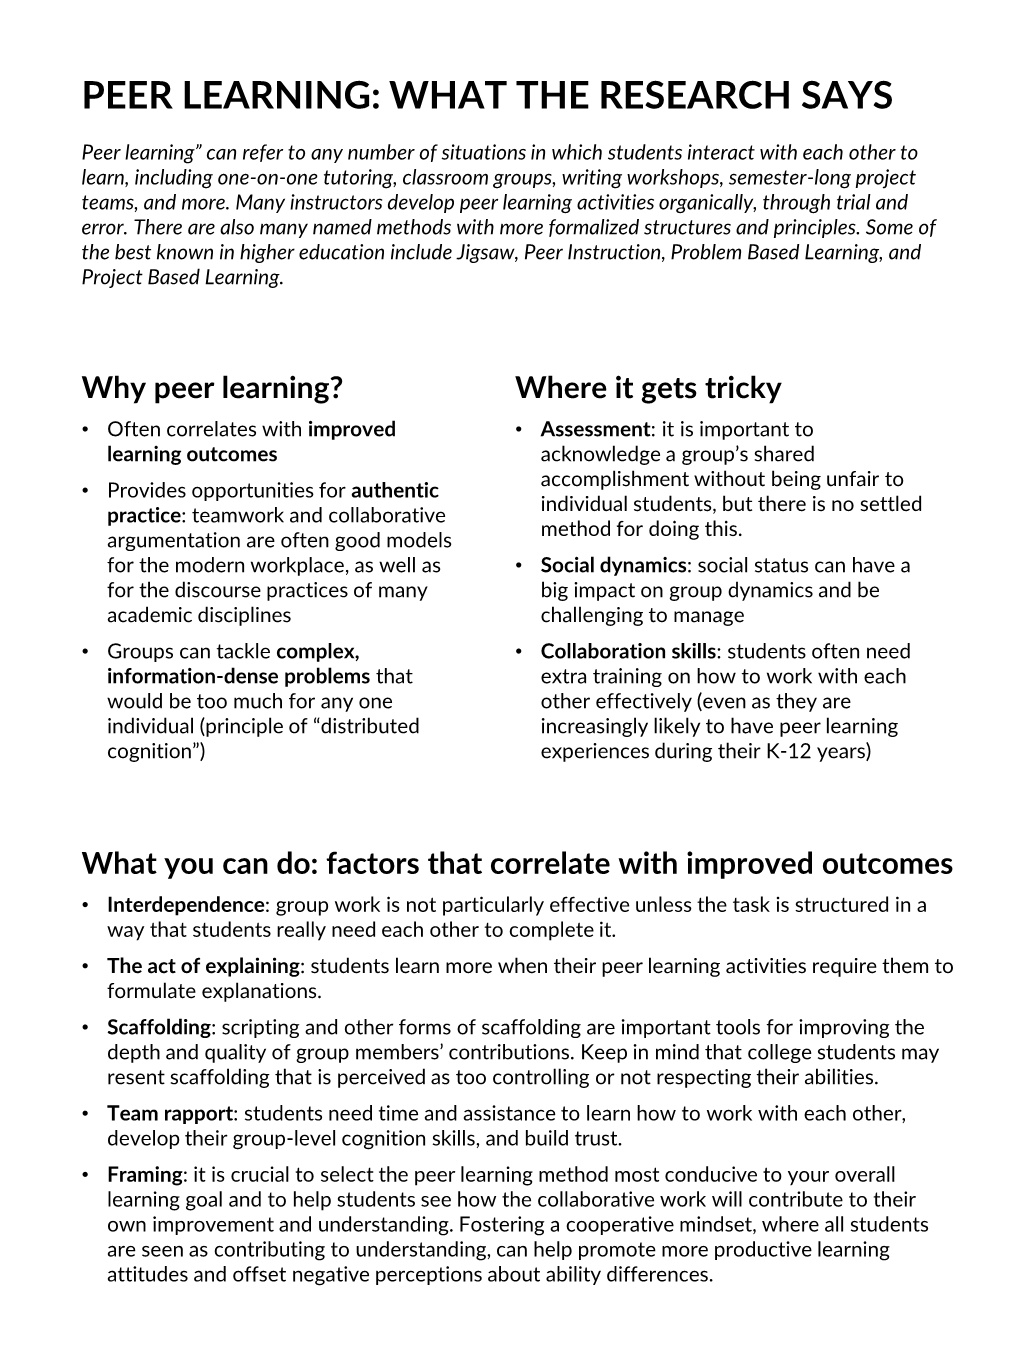 Peer Learning: What the Research Says